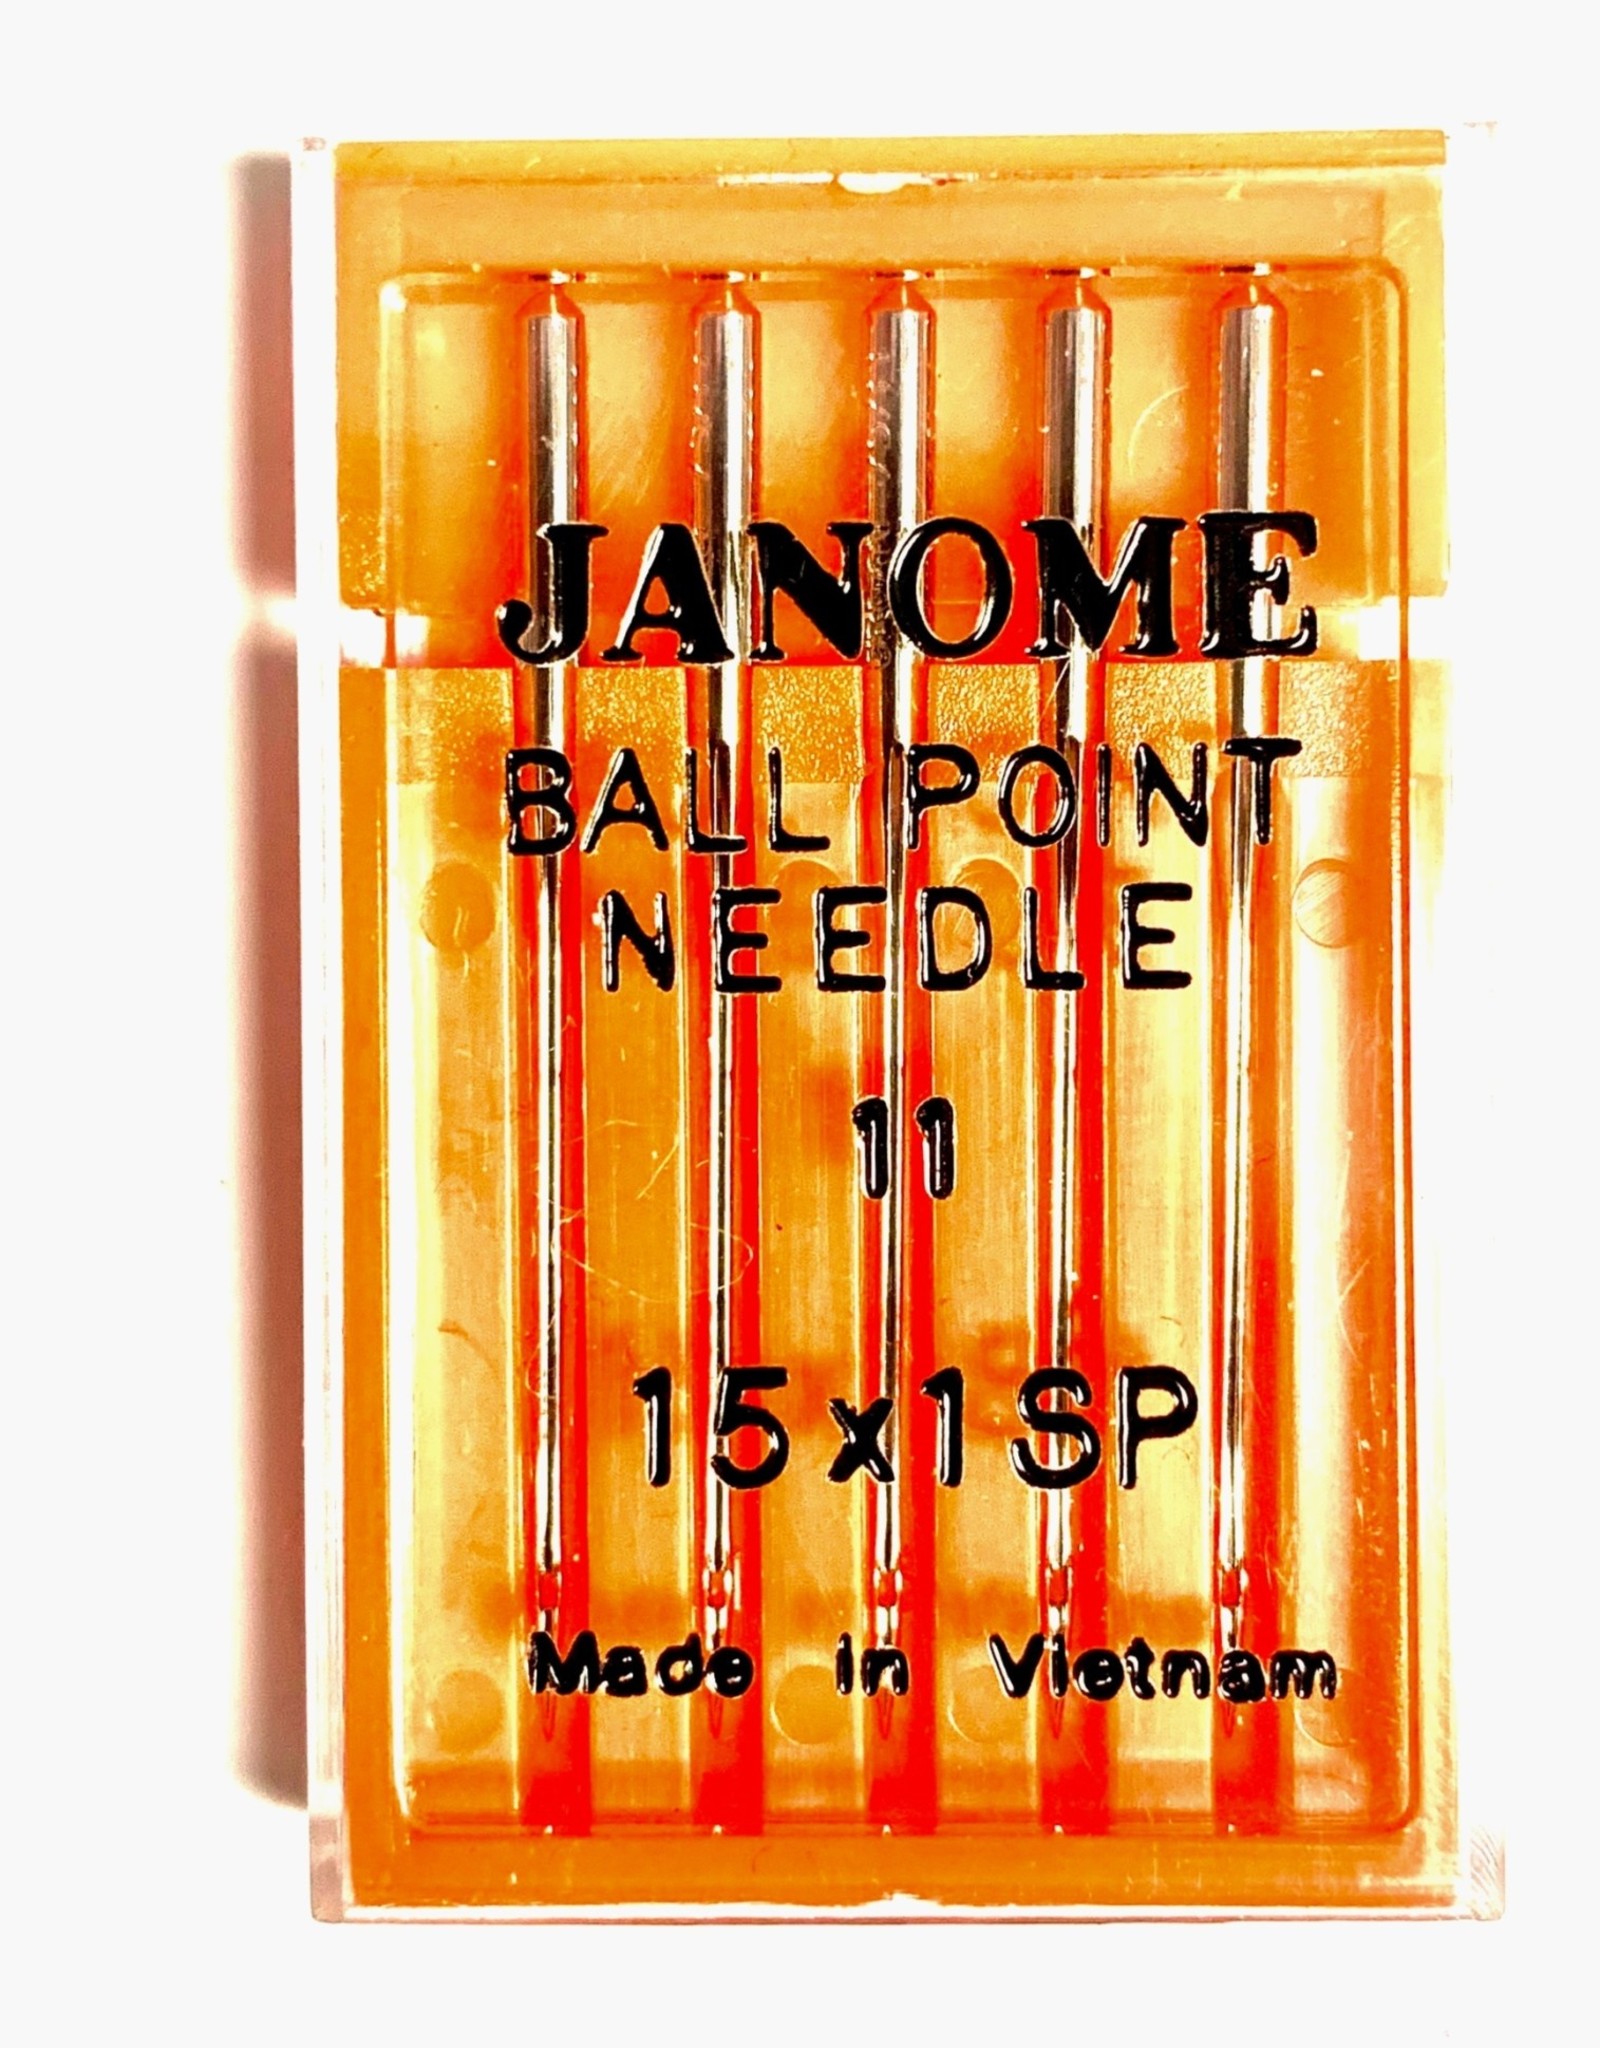 Janome Ball Point Needle 11 15 X 1 SP